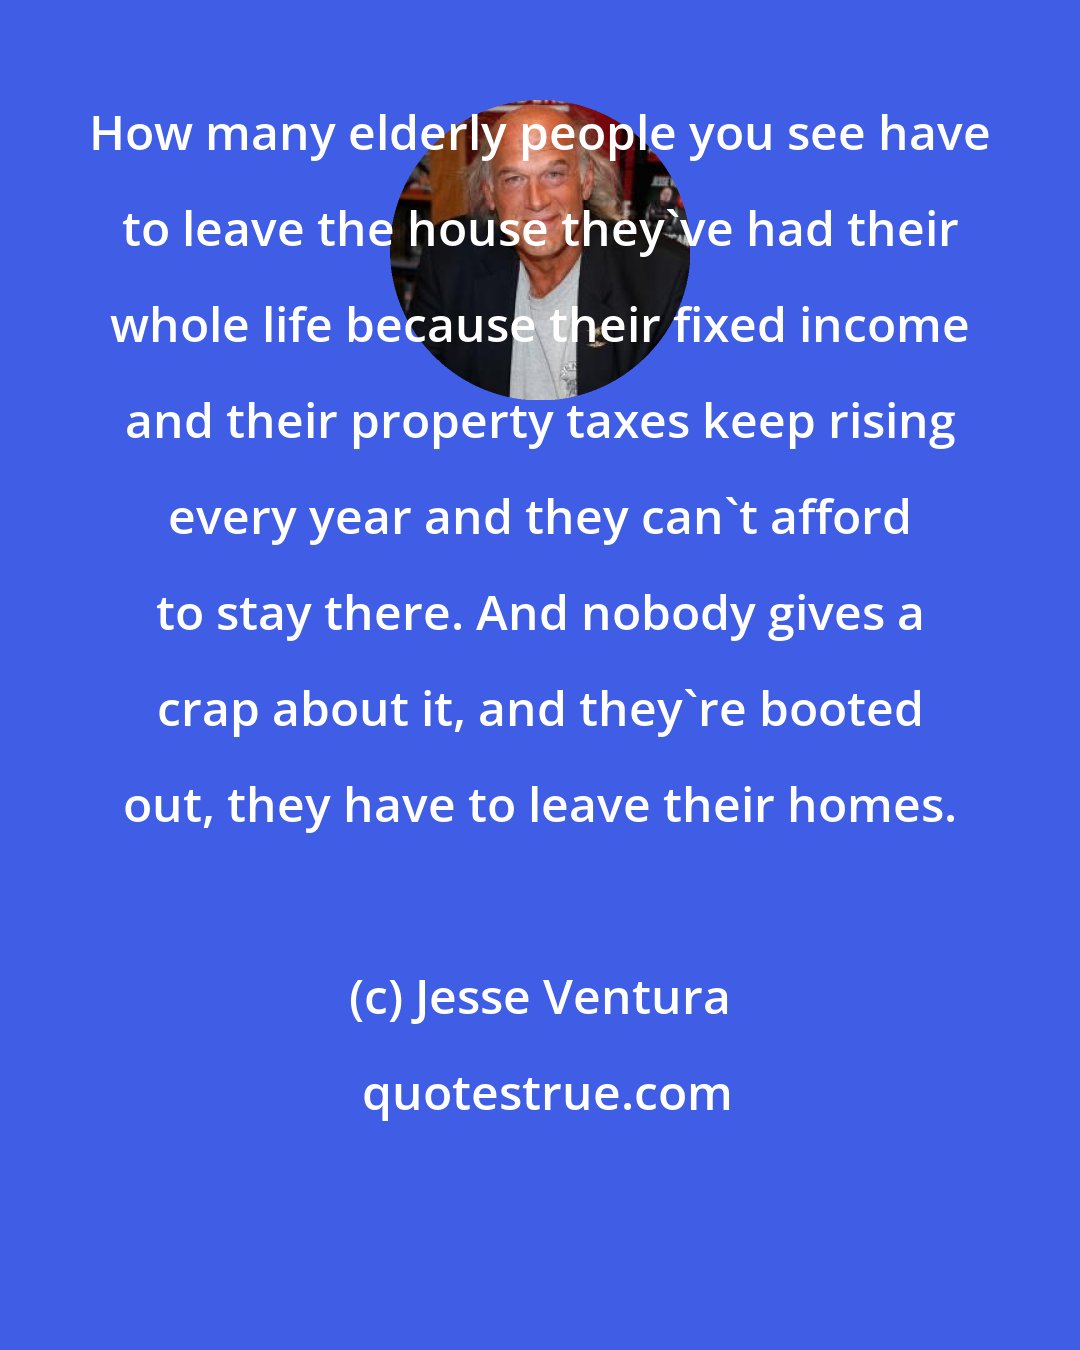 Jesse Ventura: How many elderly people you see have to leave the house they've had their whole life because their fixed income and their property taxes keep rising every year and they can't afford to stay there. And nobody gives a crap about it, and they're booted out, they have to leave their homes.